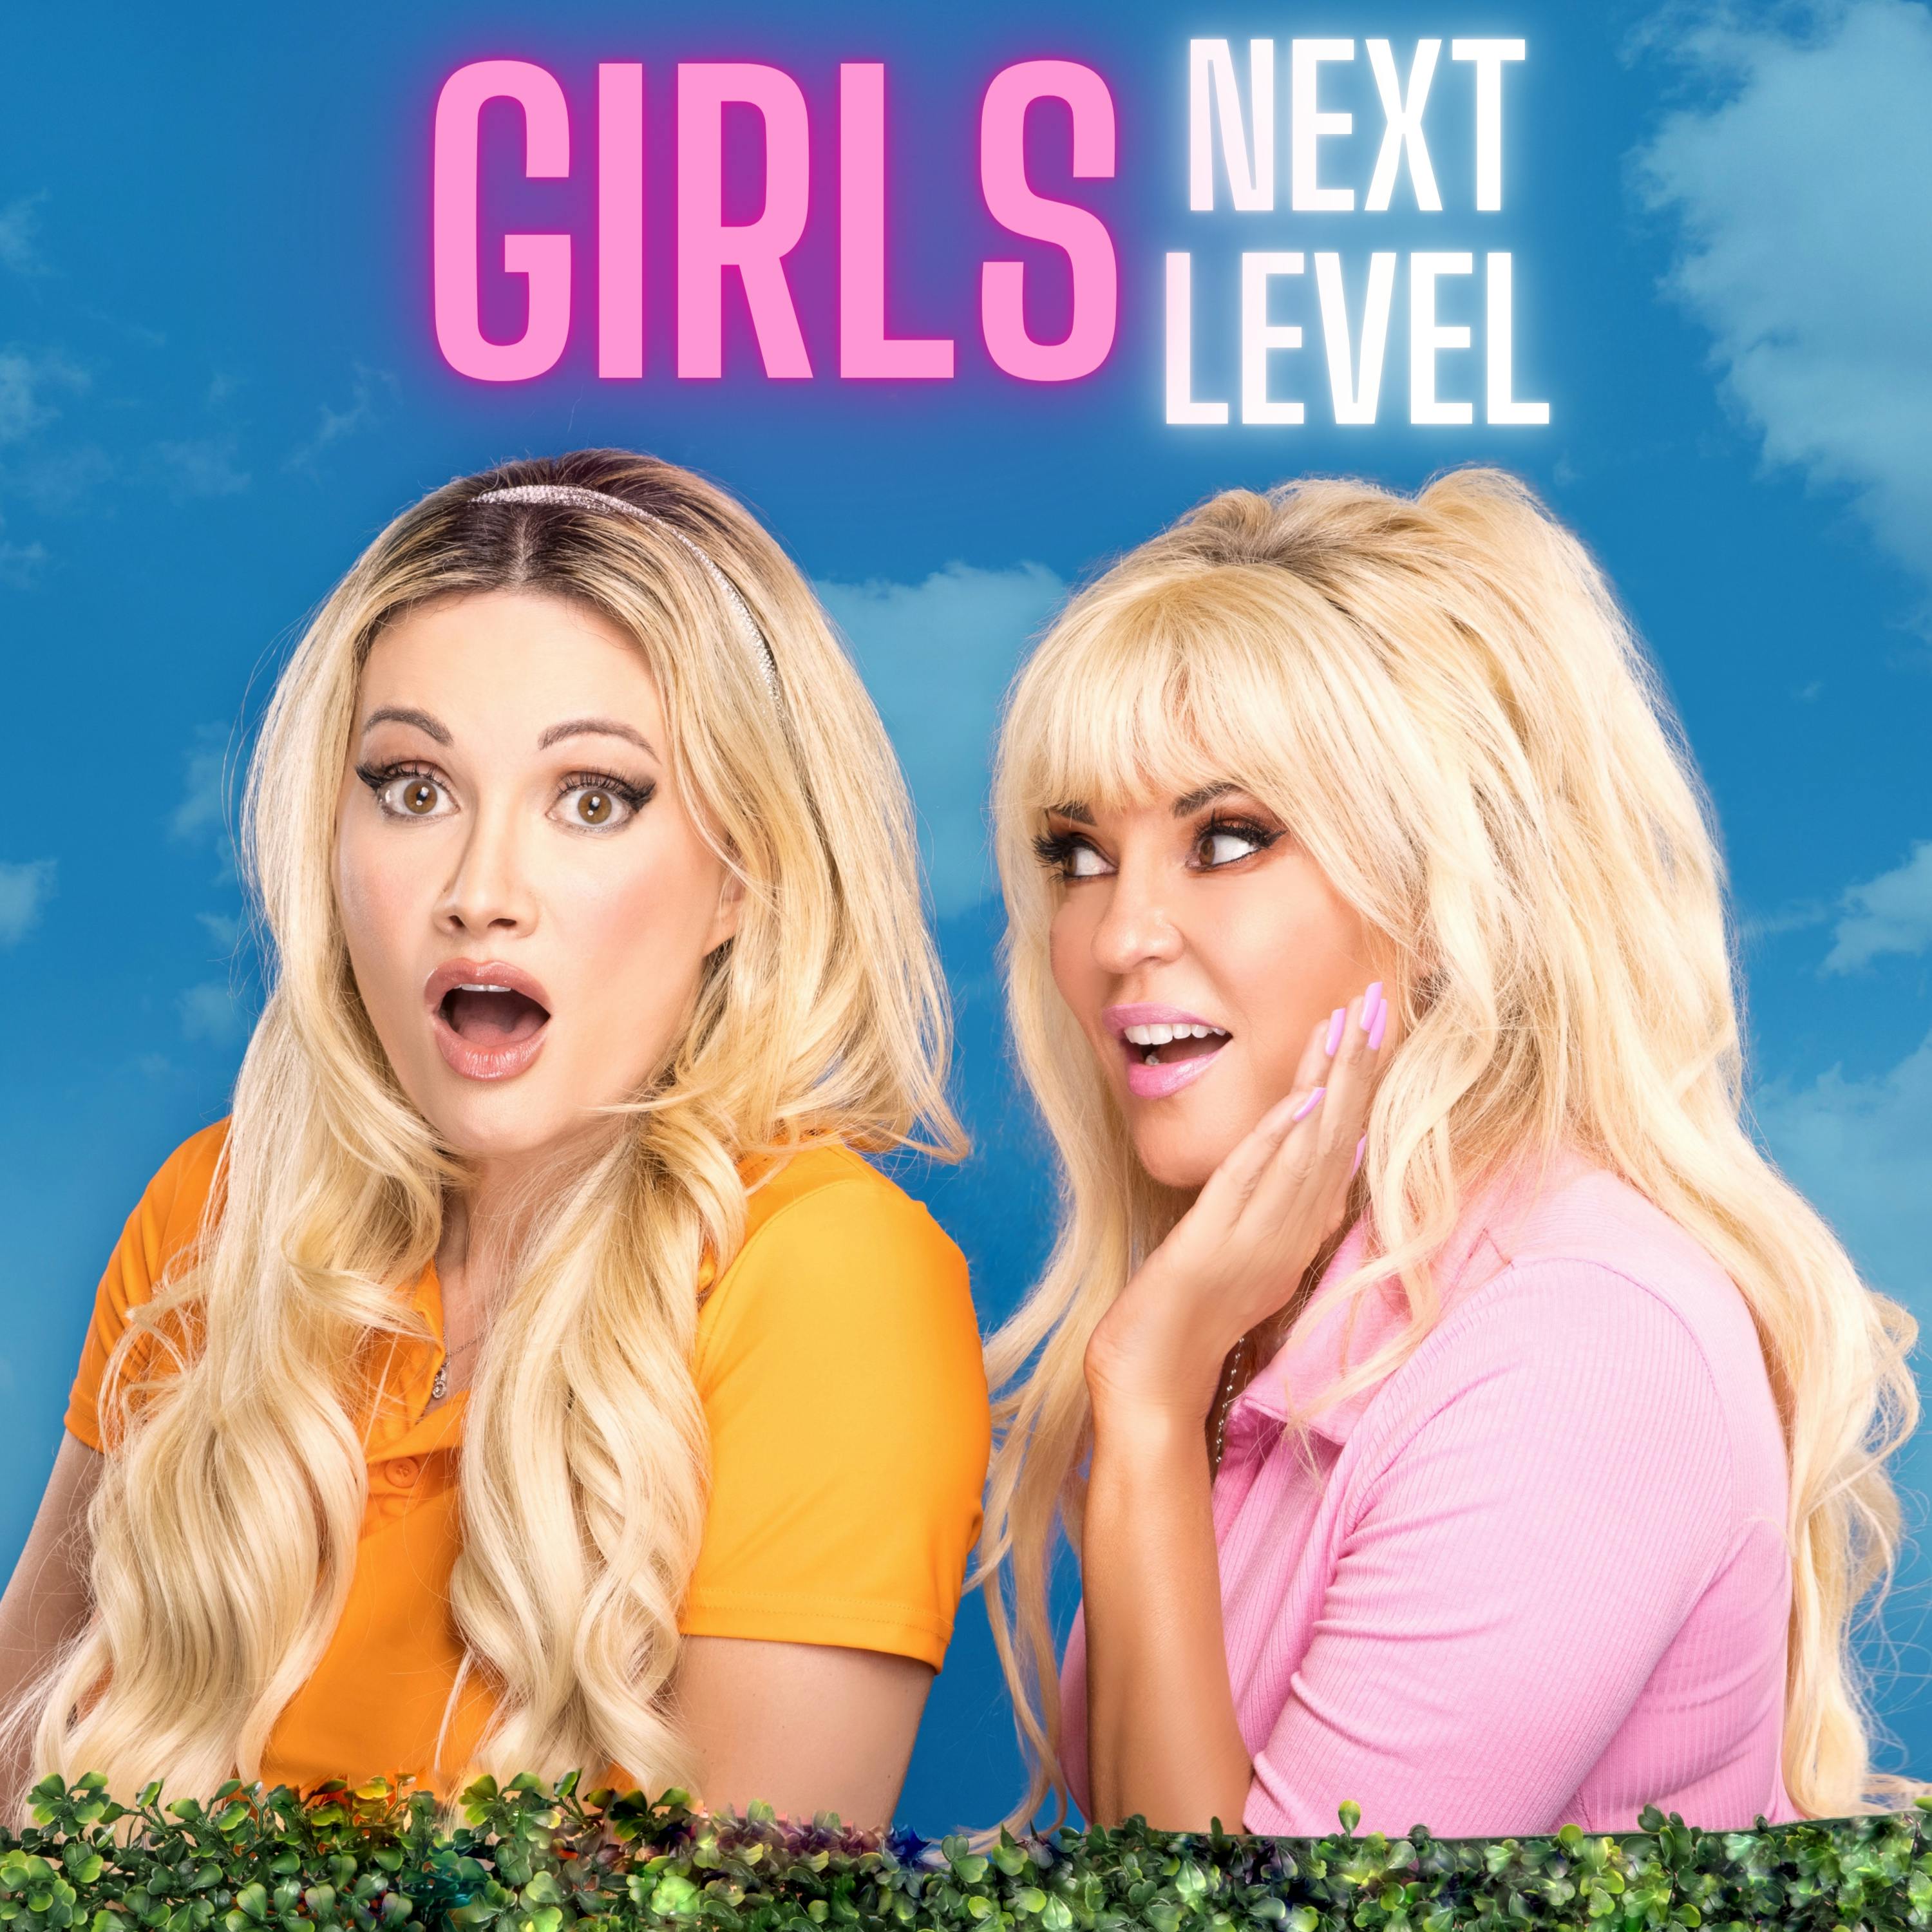 Girls Next Level by Holly Madison and Bridget Marquardt